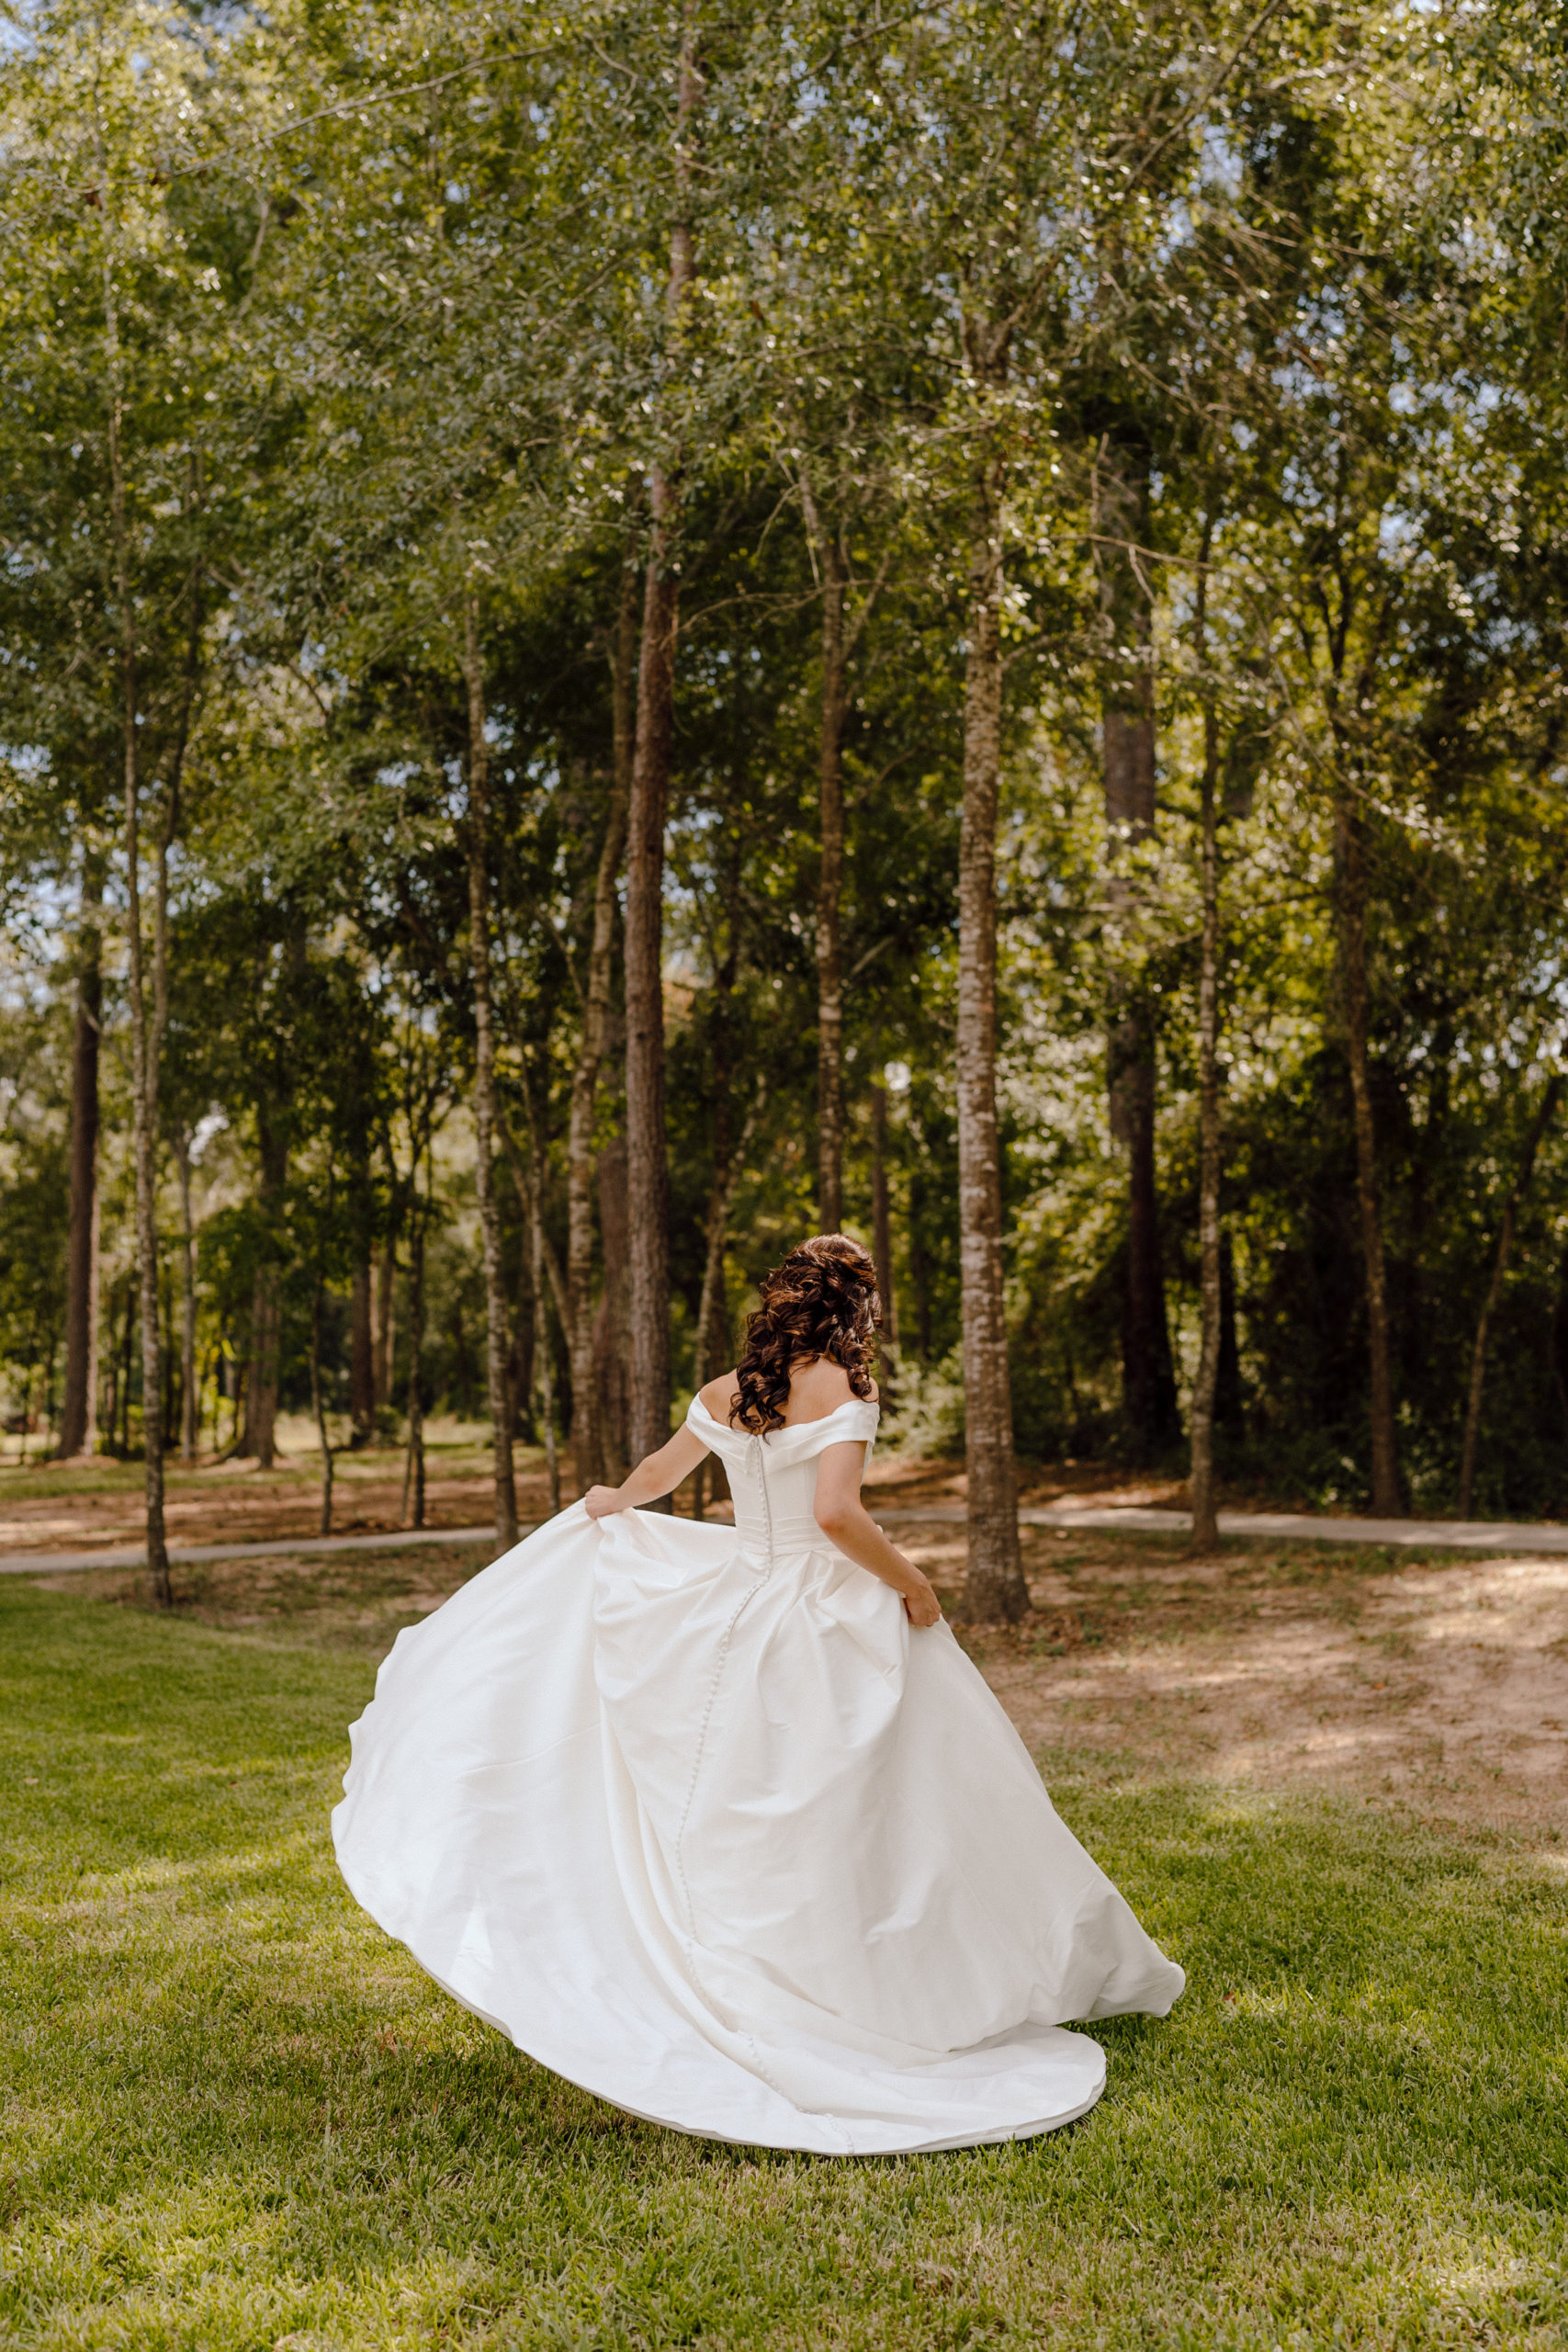 These timeless pre wedding bridal portraits took place at the Reserve at Cypress Creek. We explored the Texas venue to create stunning portraits. The brides italian inspired wedding gown and bouquet was the perfect combination for the editorial style wedding. This photojournalistic wedding was perfect in every way!